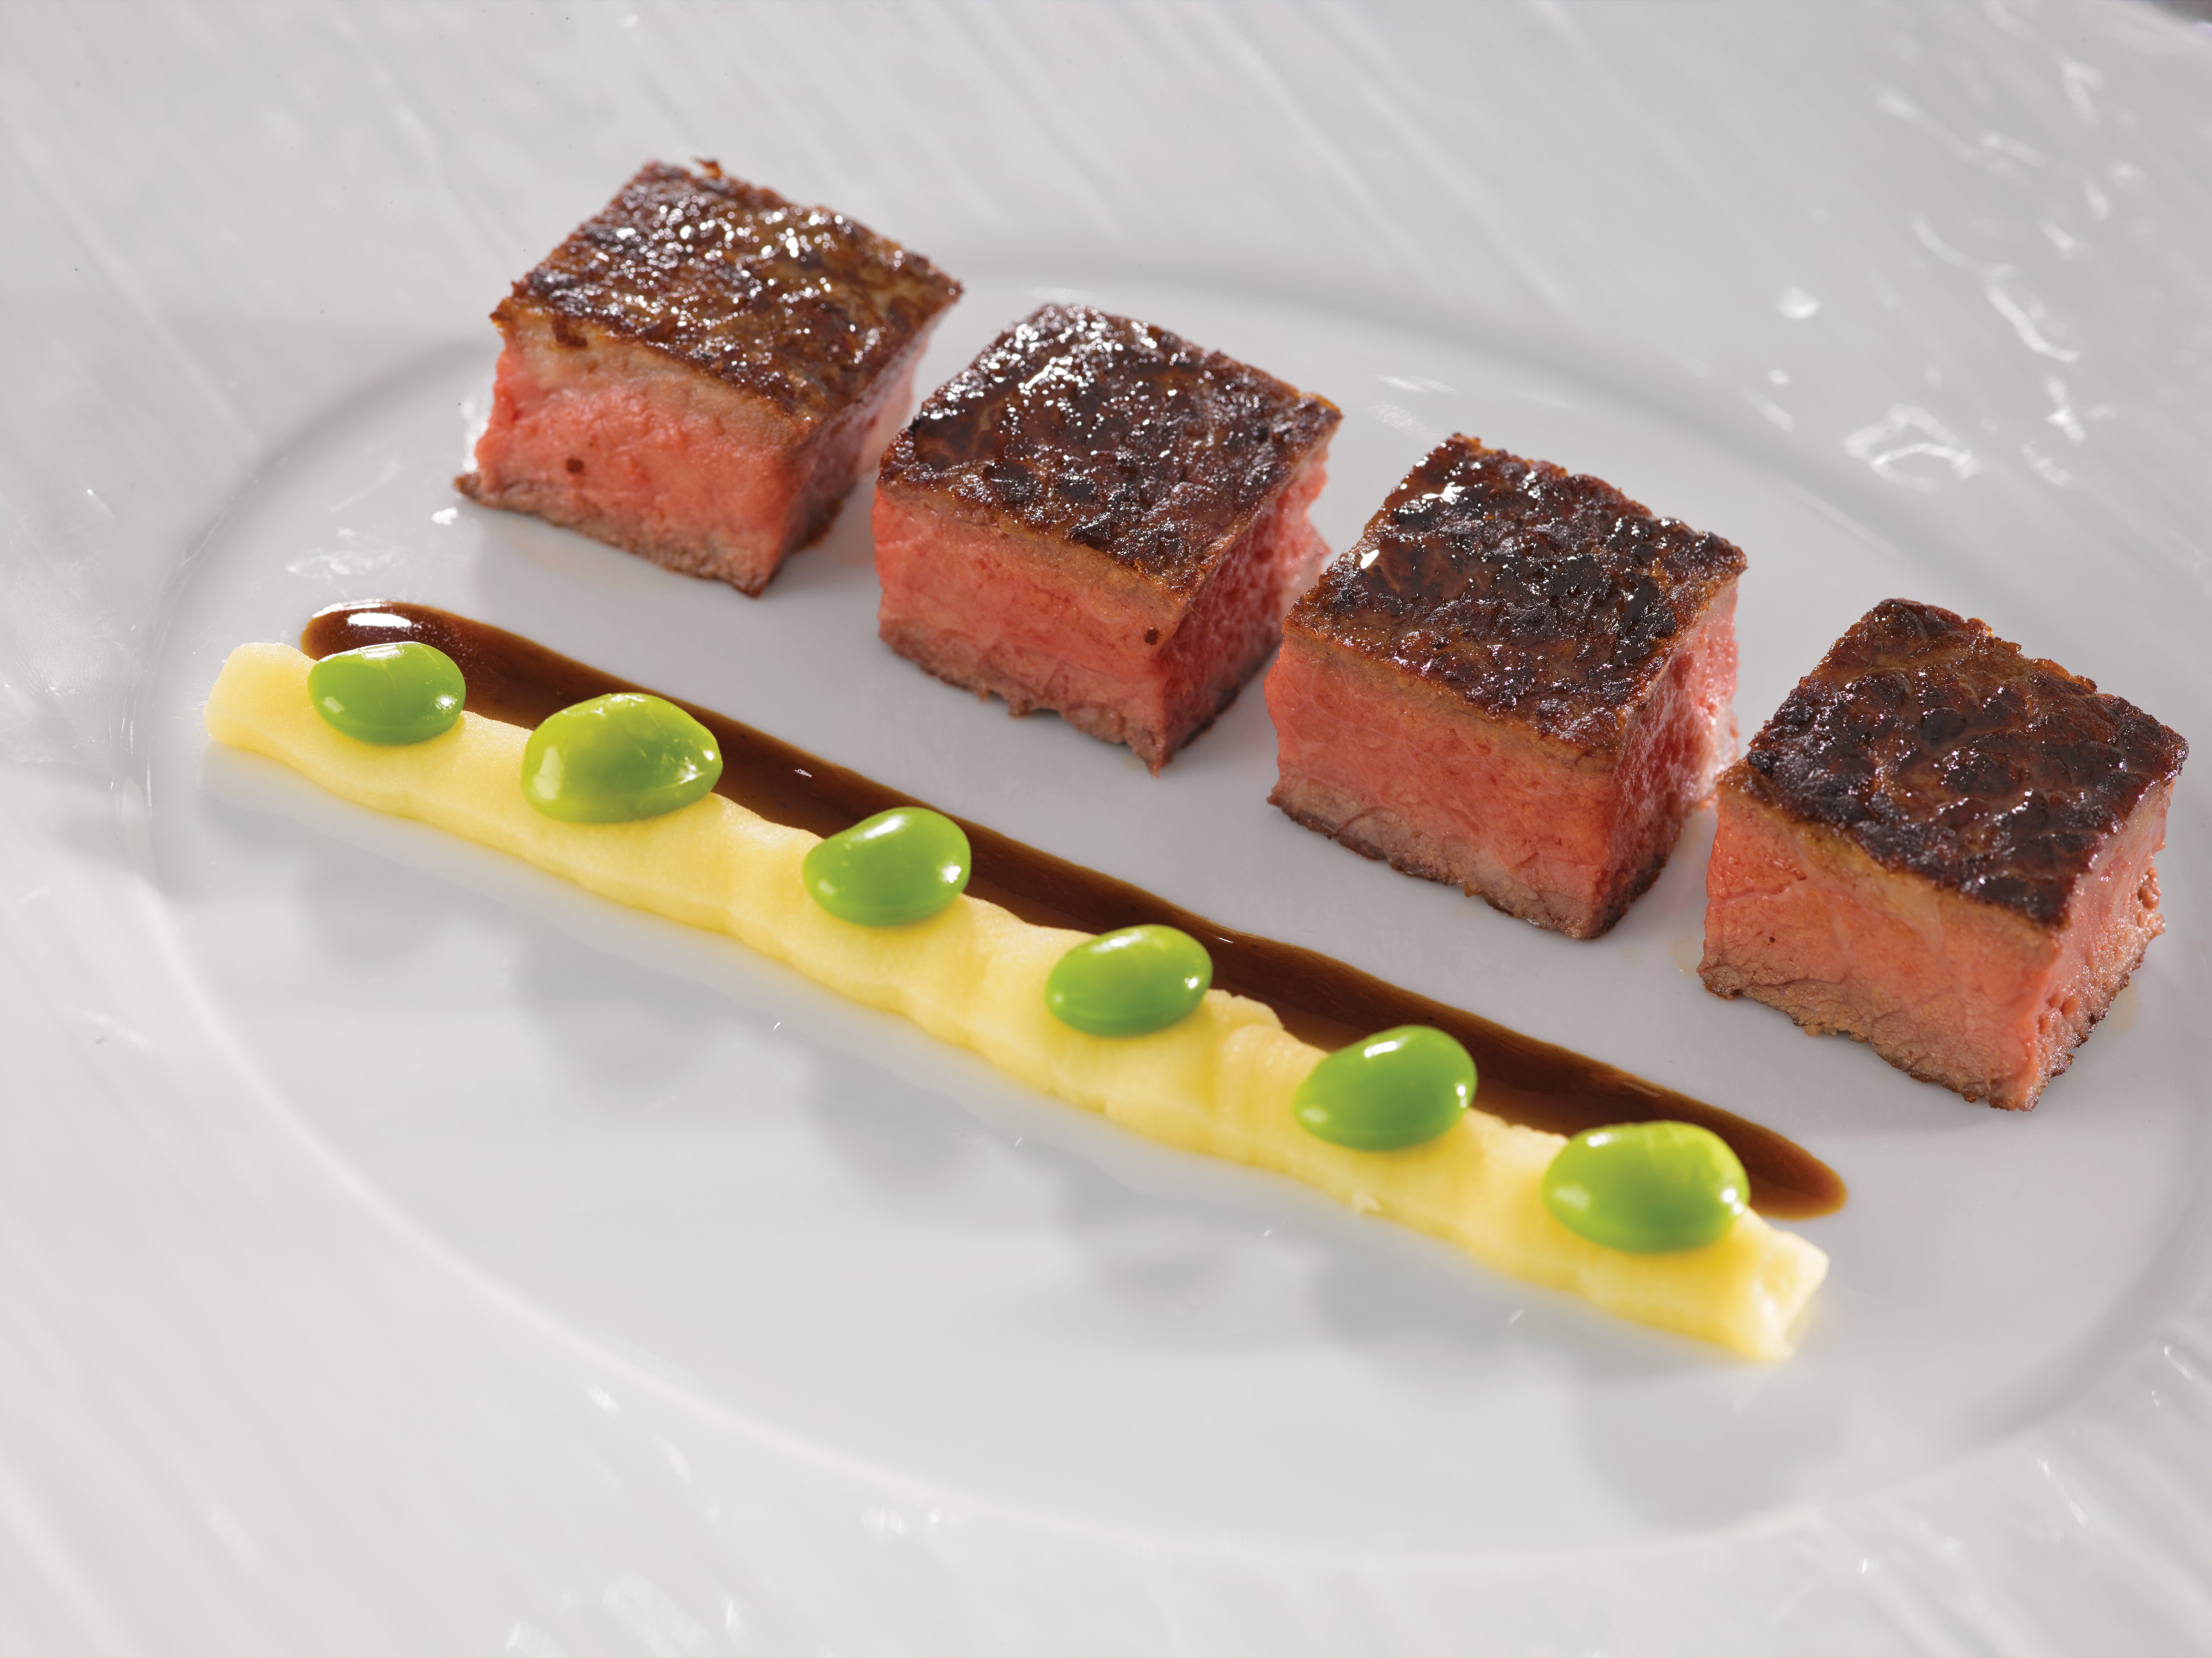 Seared Kobe Beef sous vide with Valrhona sauce at La Reserve on Oceania.